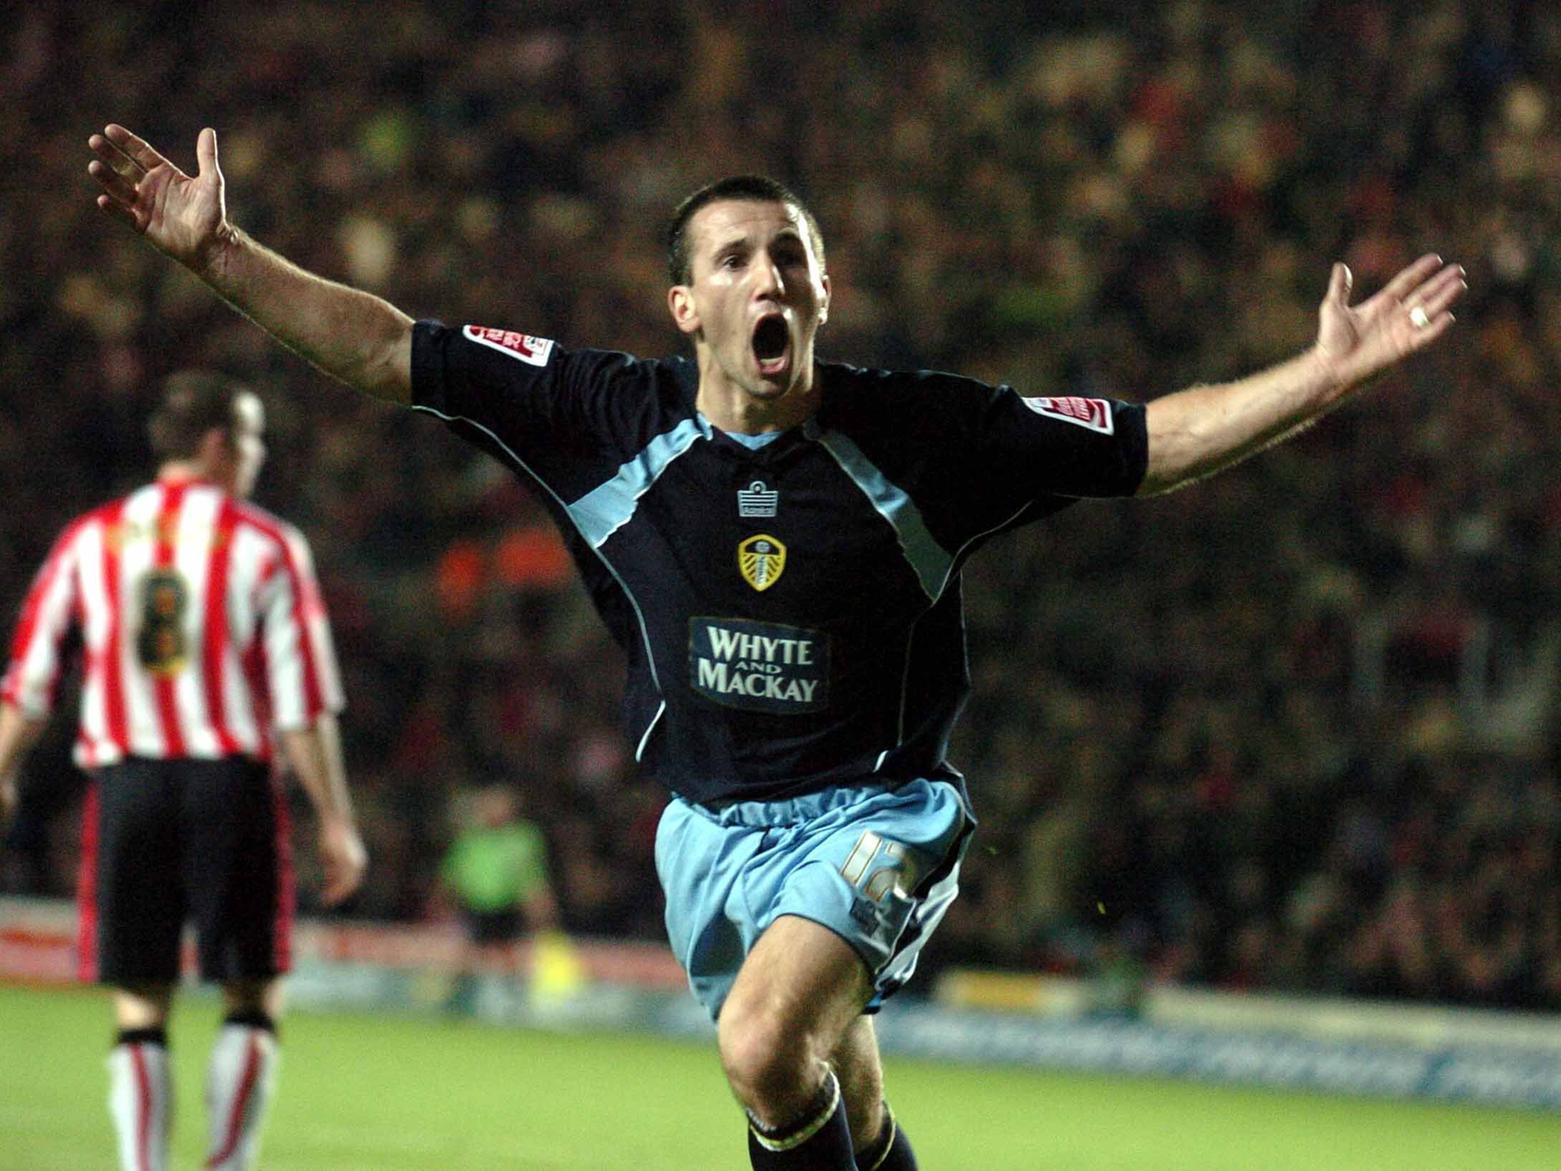 "3-0 down at half time. David Healy came on around 70th minute and changed the game. Liam Miller (RIP) scored the last minute winner. SCENES. I was in the Southampton end. I could have died that day" - Michael Shanly